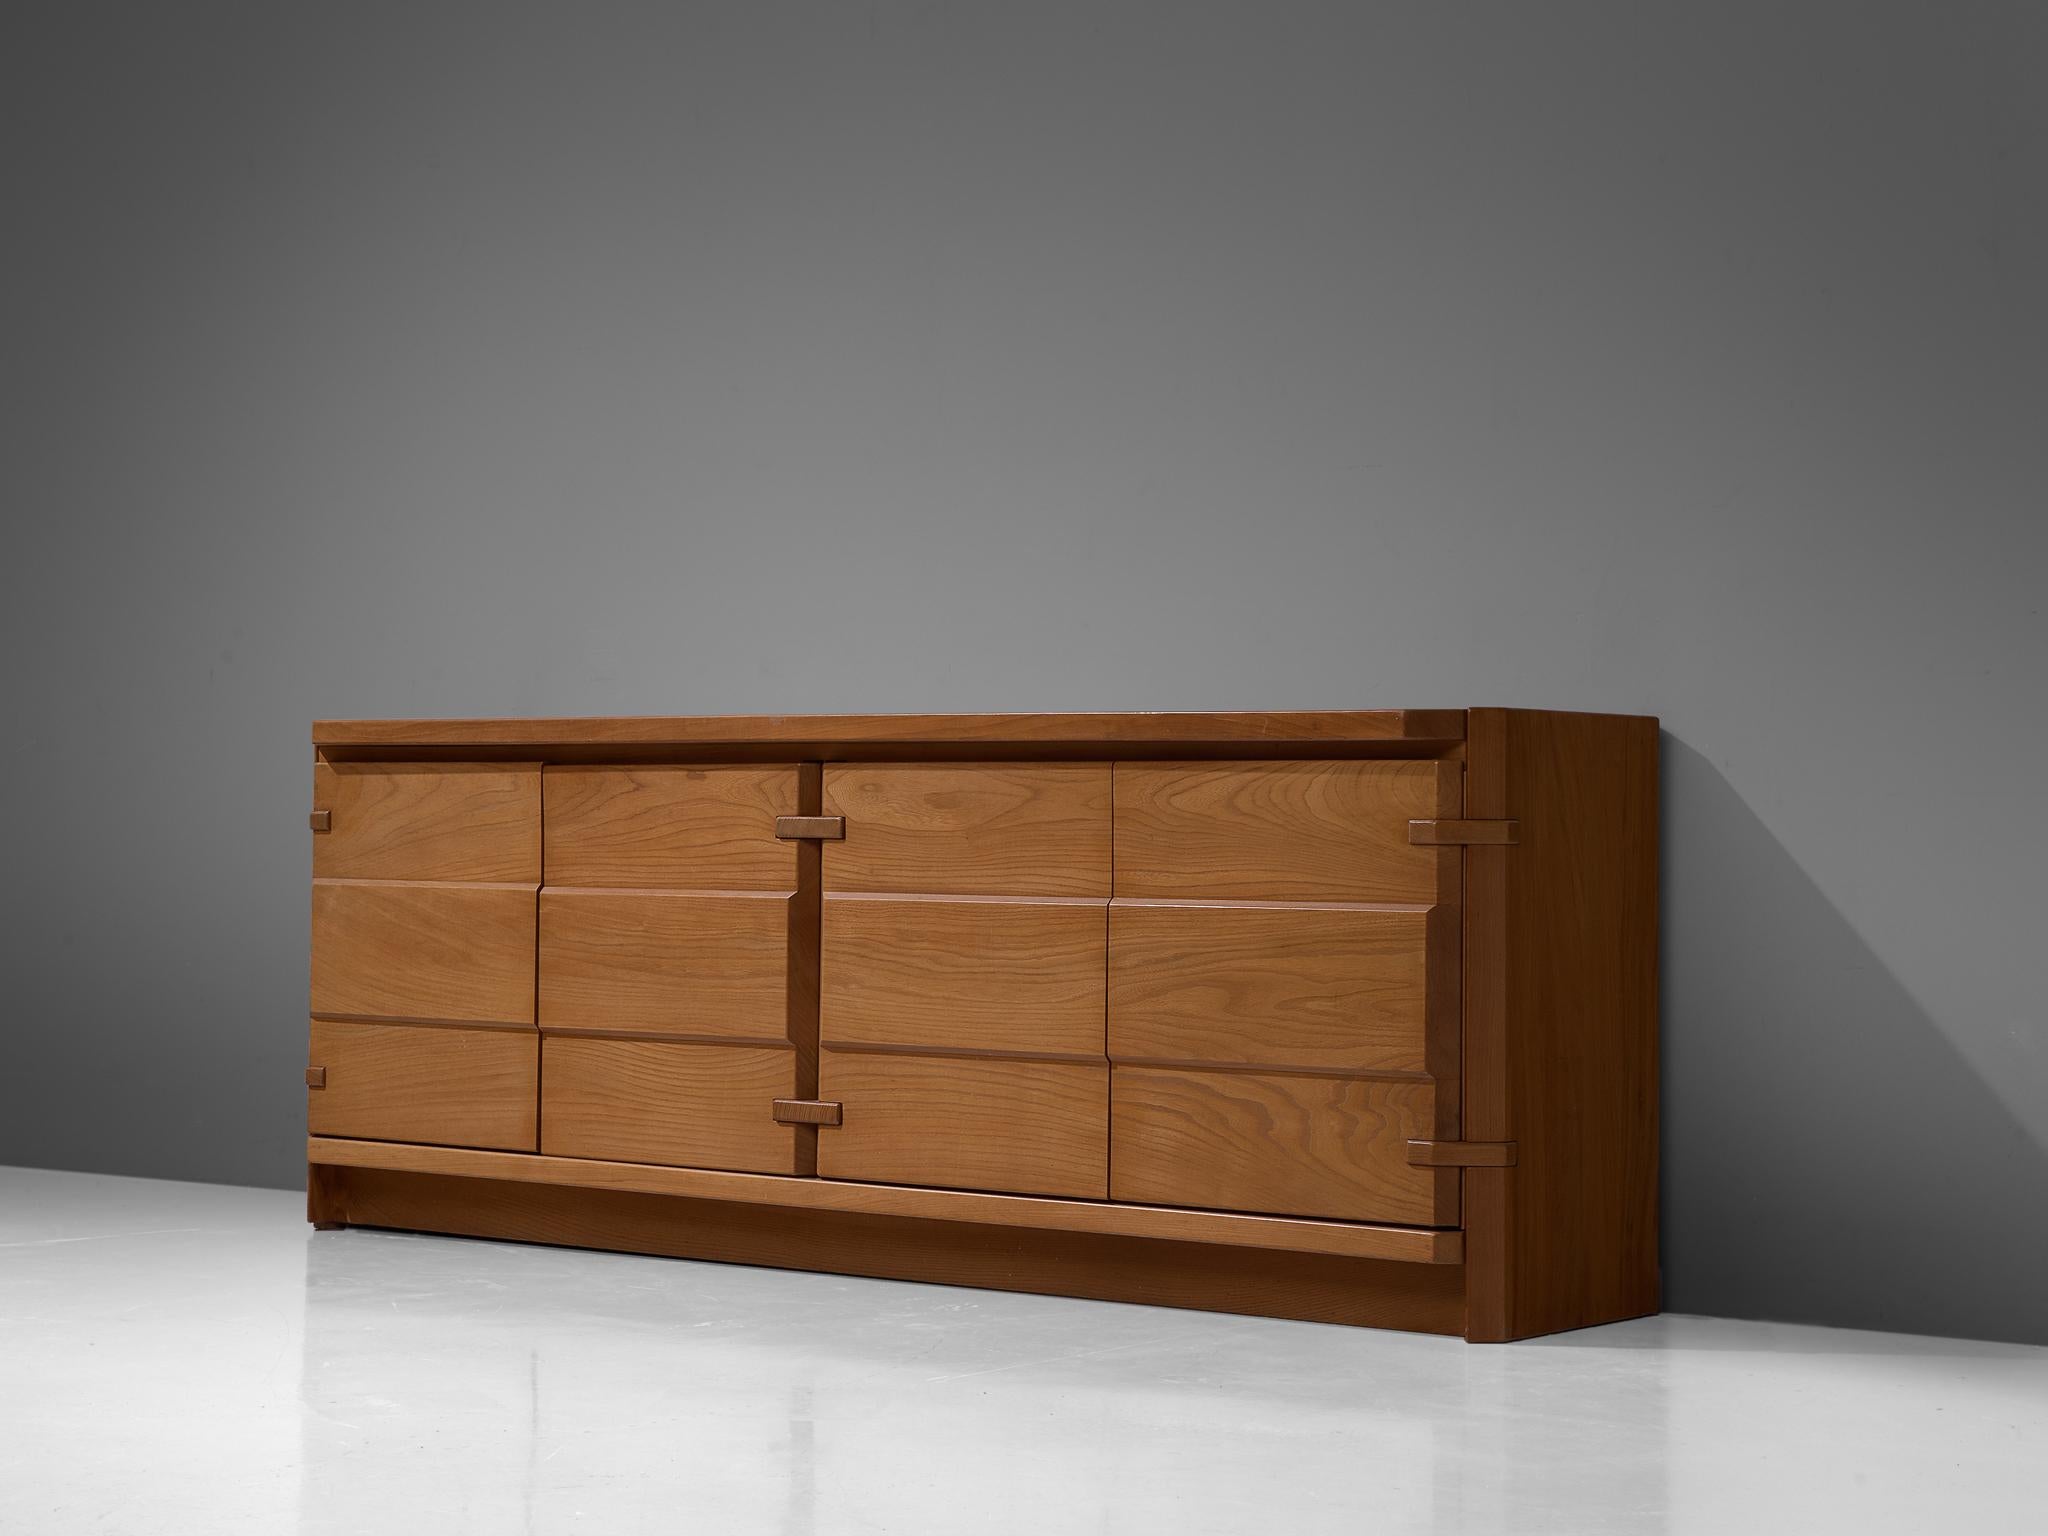 Sideboard, elm, France, 1980s

Angular sideboard from France in the style of Pierre Chapo. The credenza seems to be completely executed in elm, even the joints visible on the outside are made of wood. The doors show a sutle structure that reminds